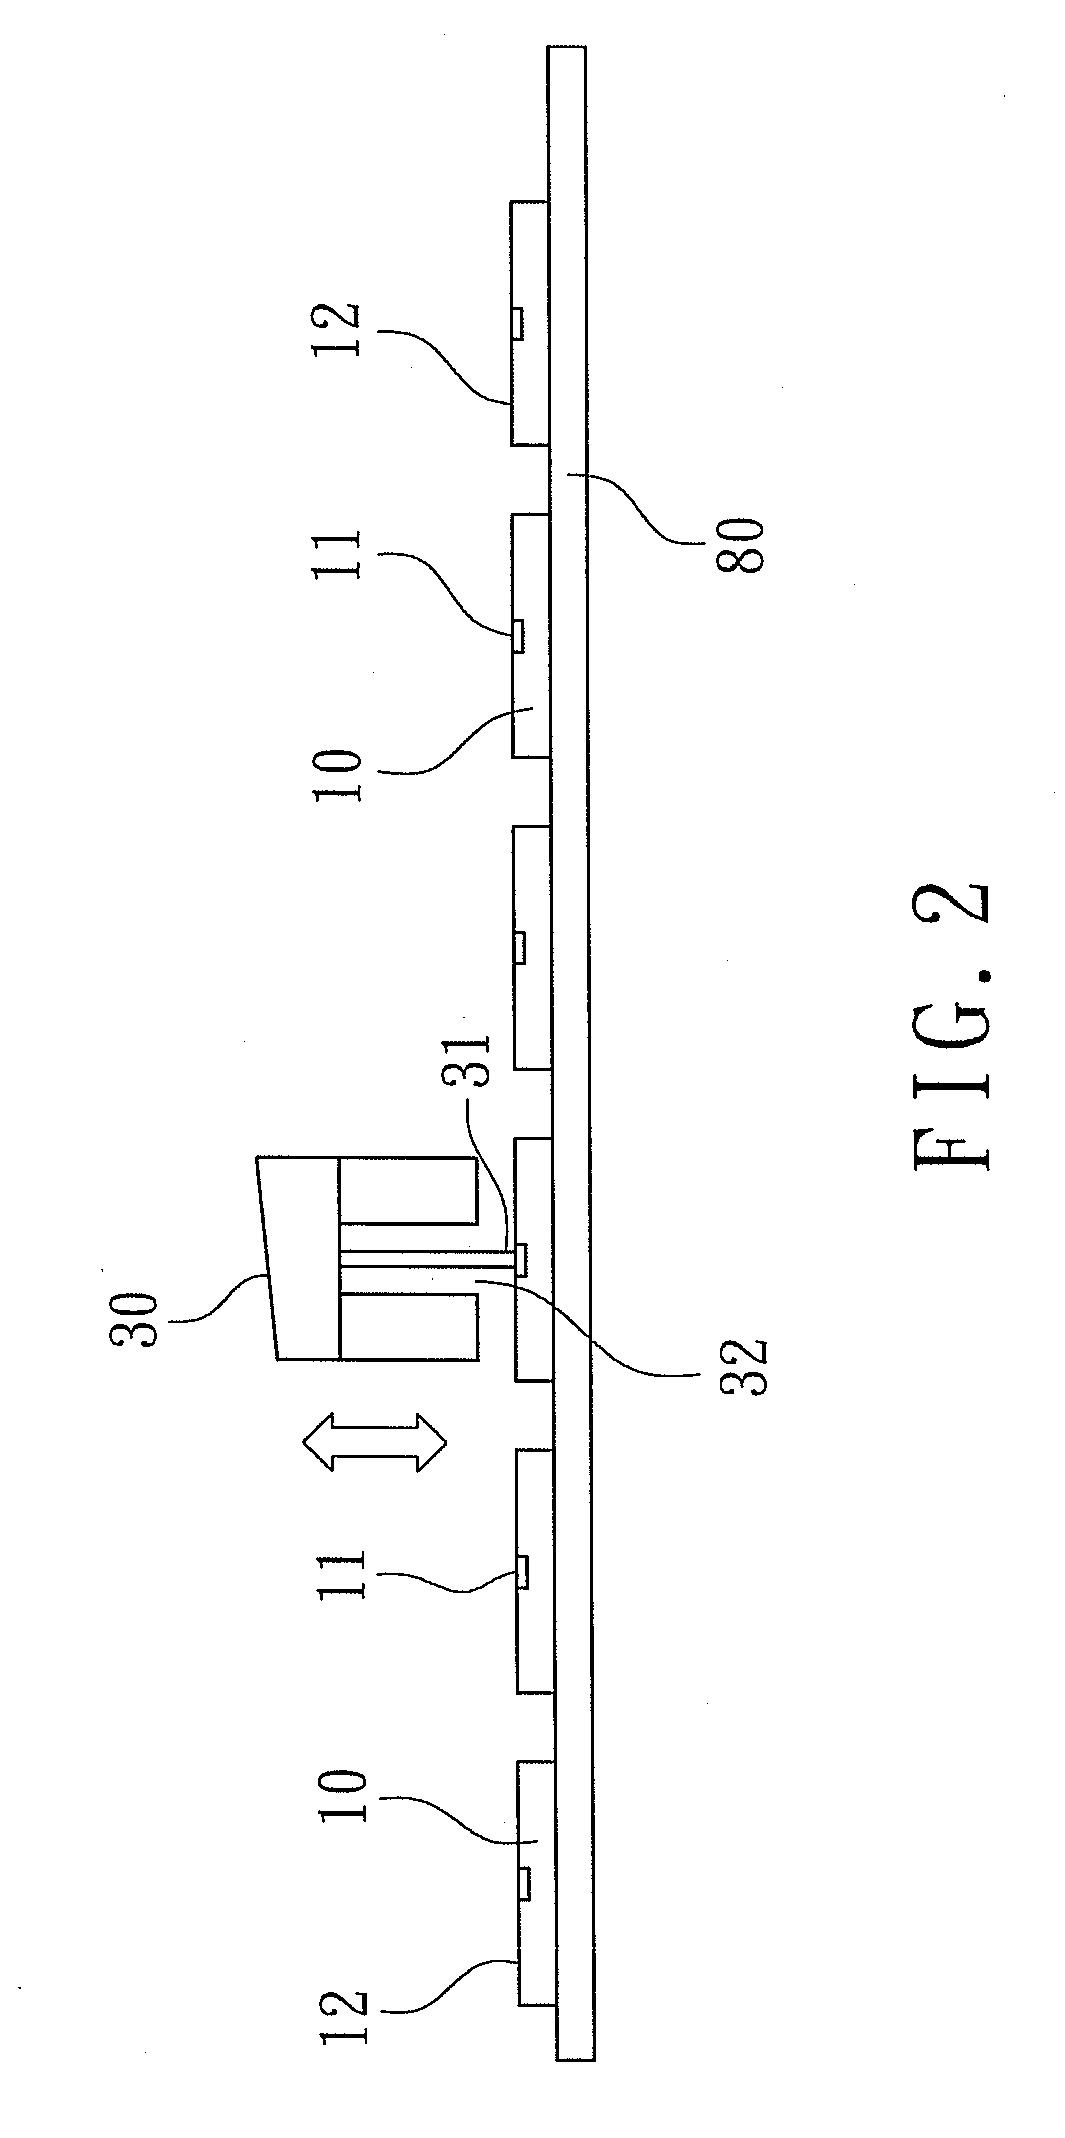 Method for die bonding having pick-and-probing feature